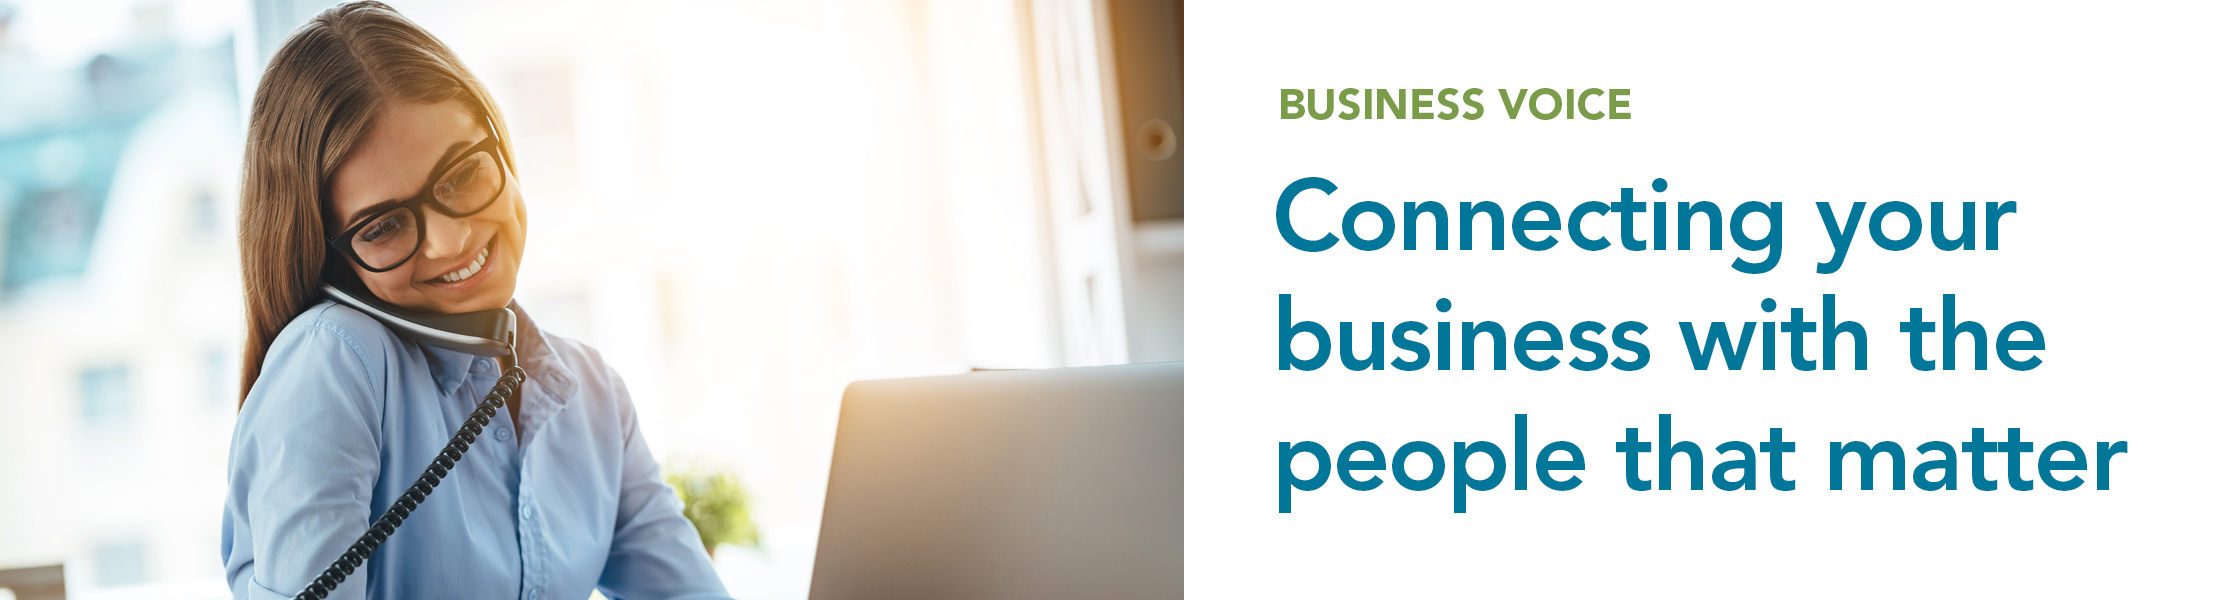 Connecting your business with the people that matter